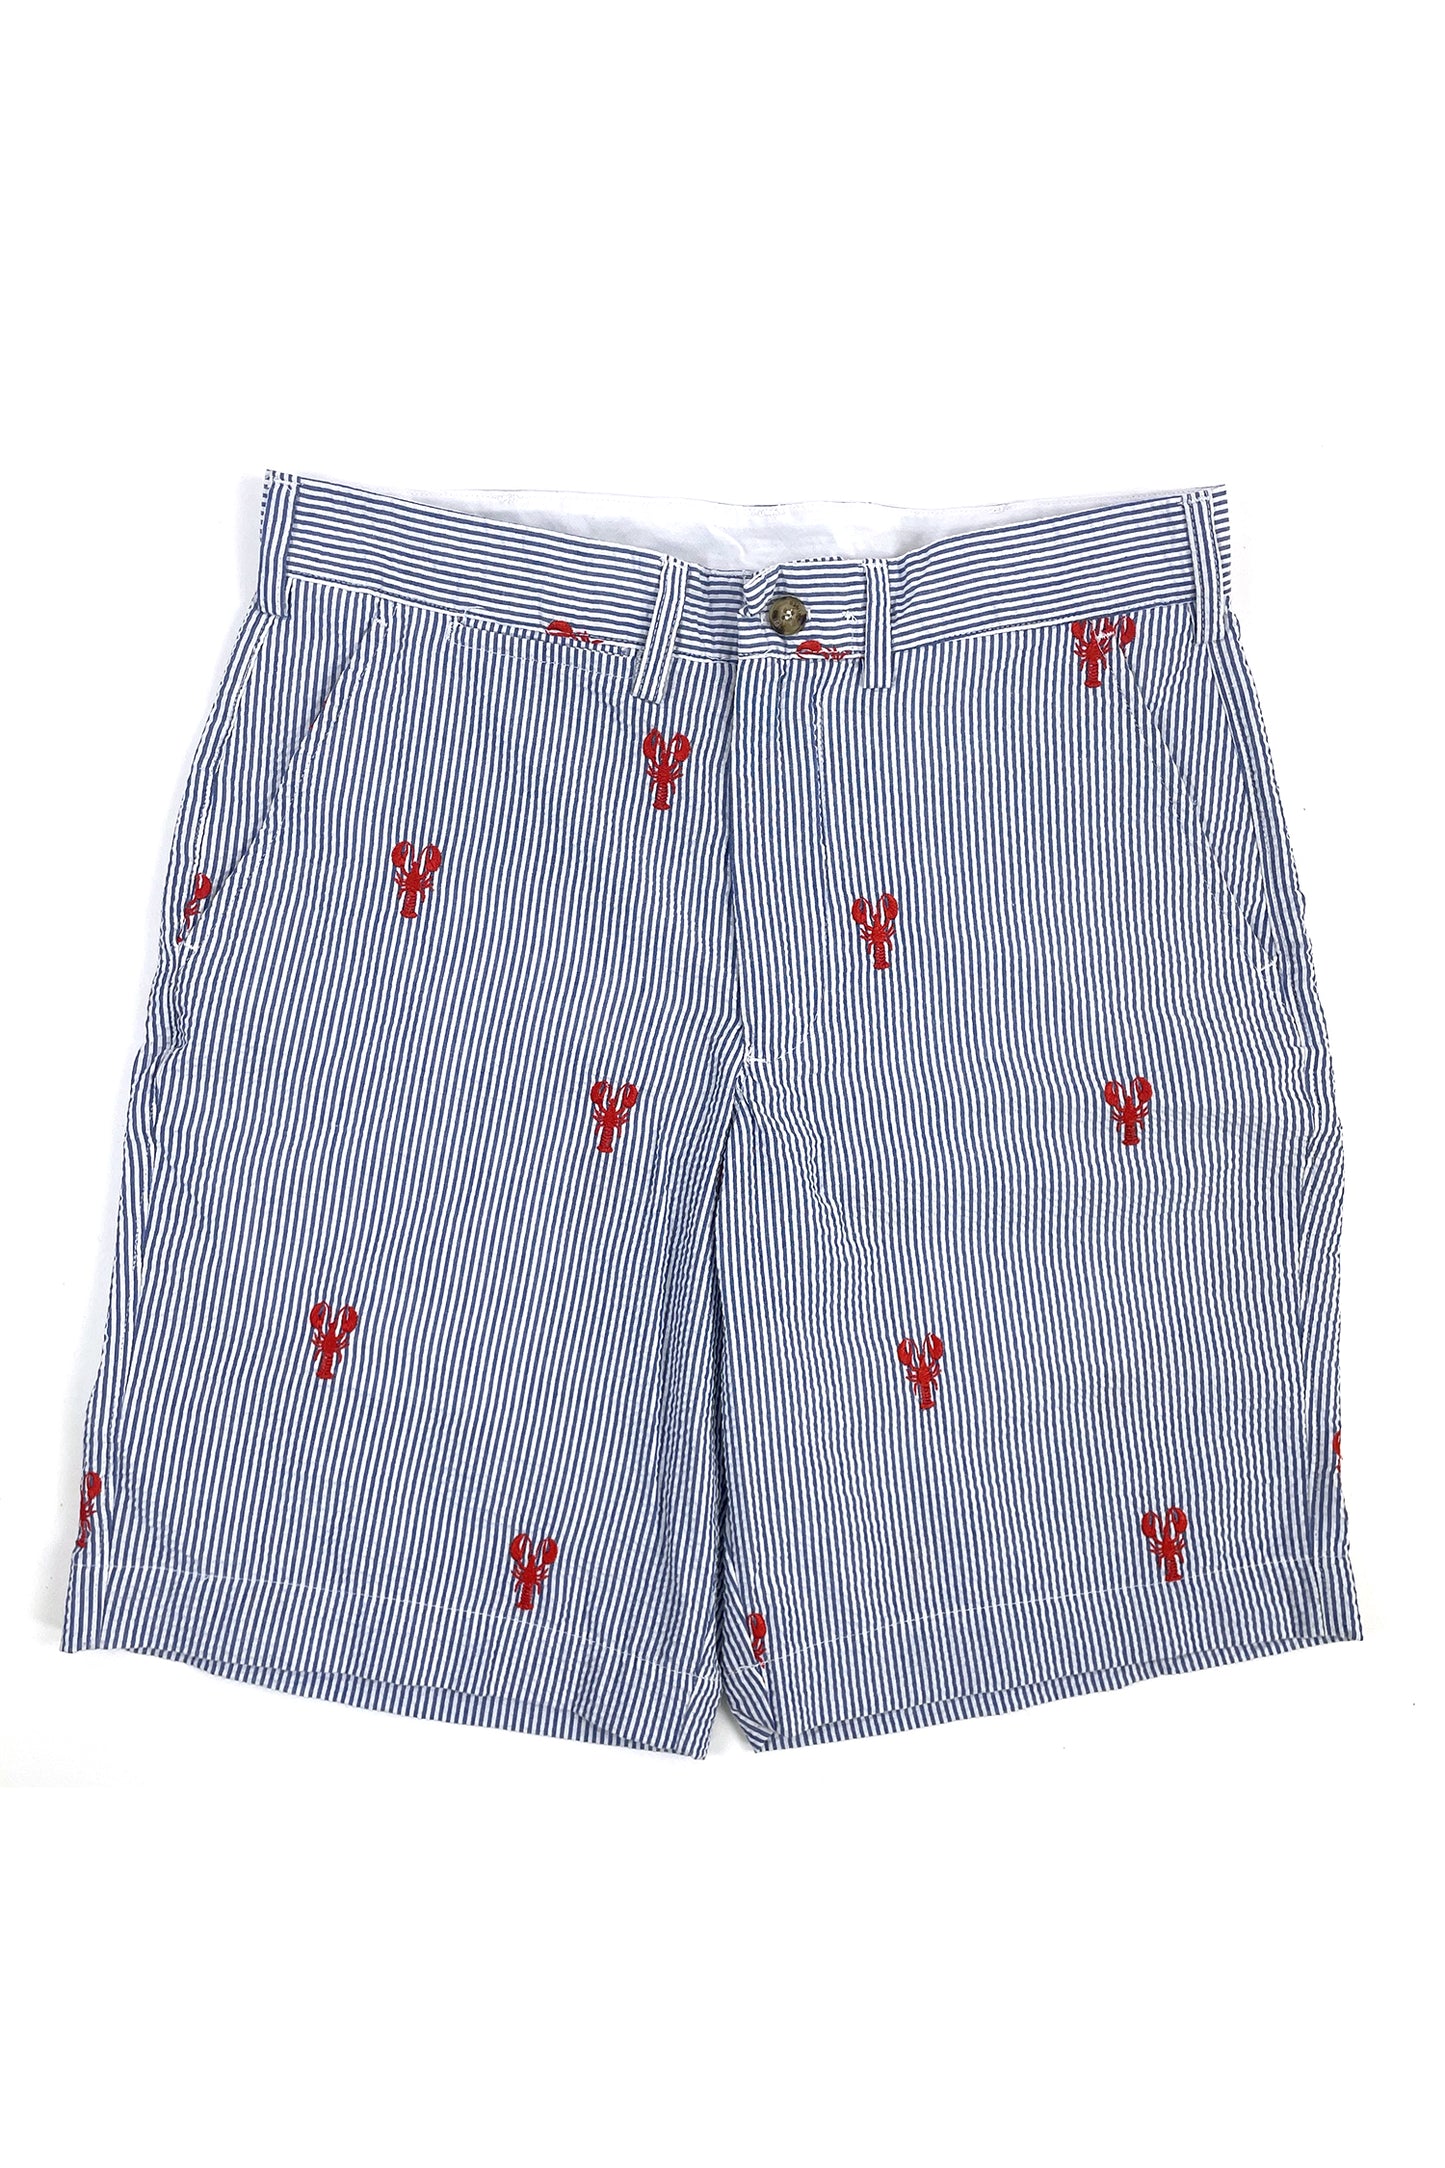 Blue Mens Seersucker Shorts with Red Embroidered Lobsters